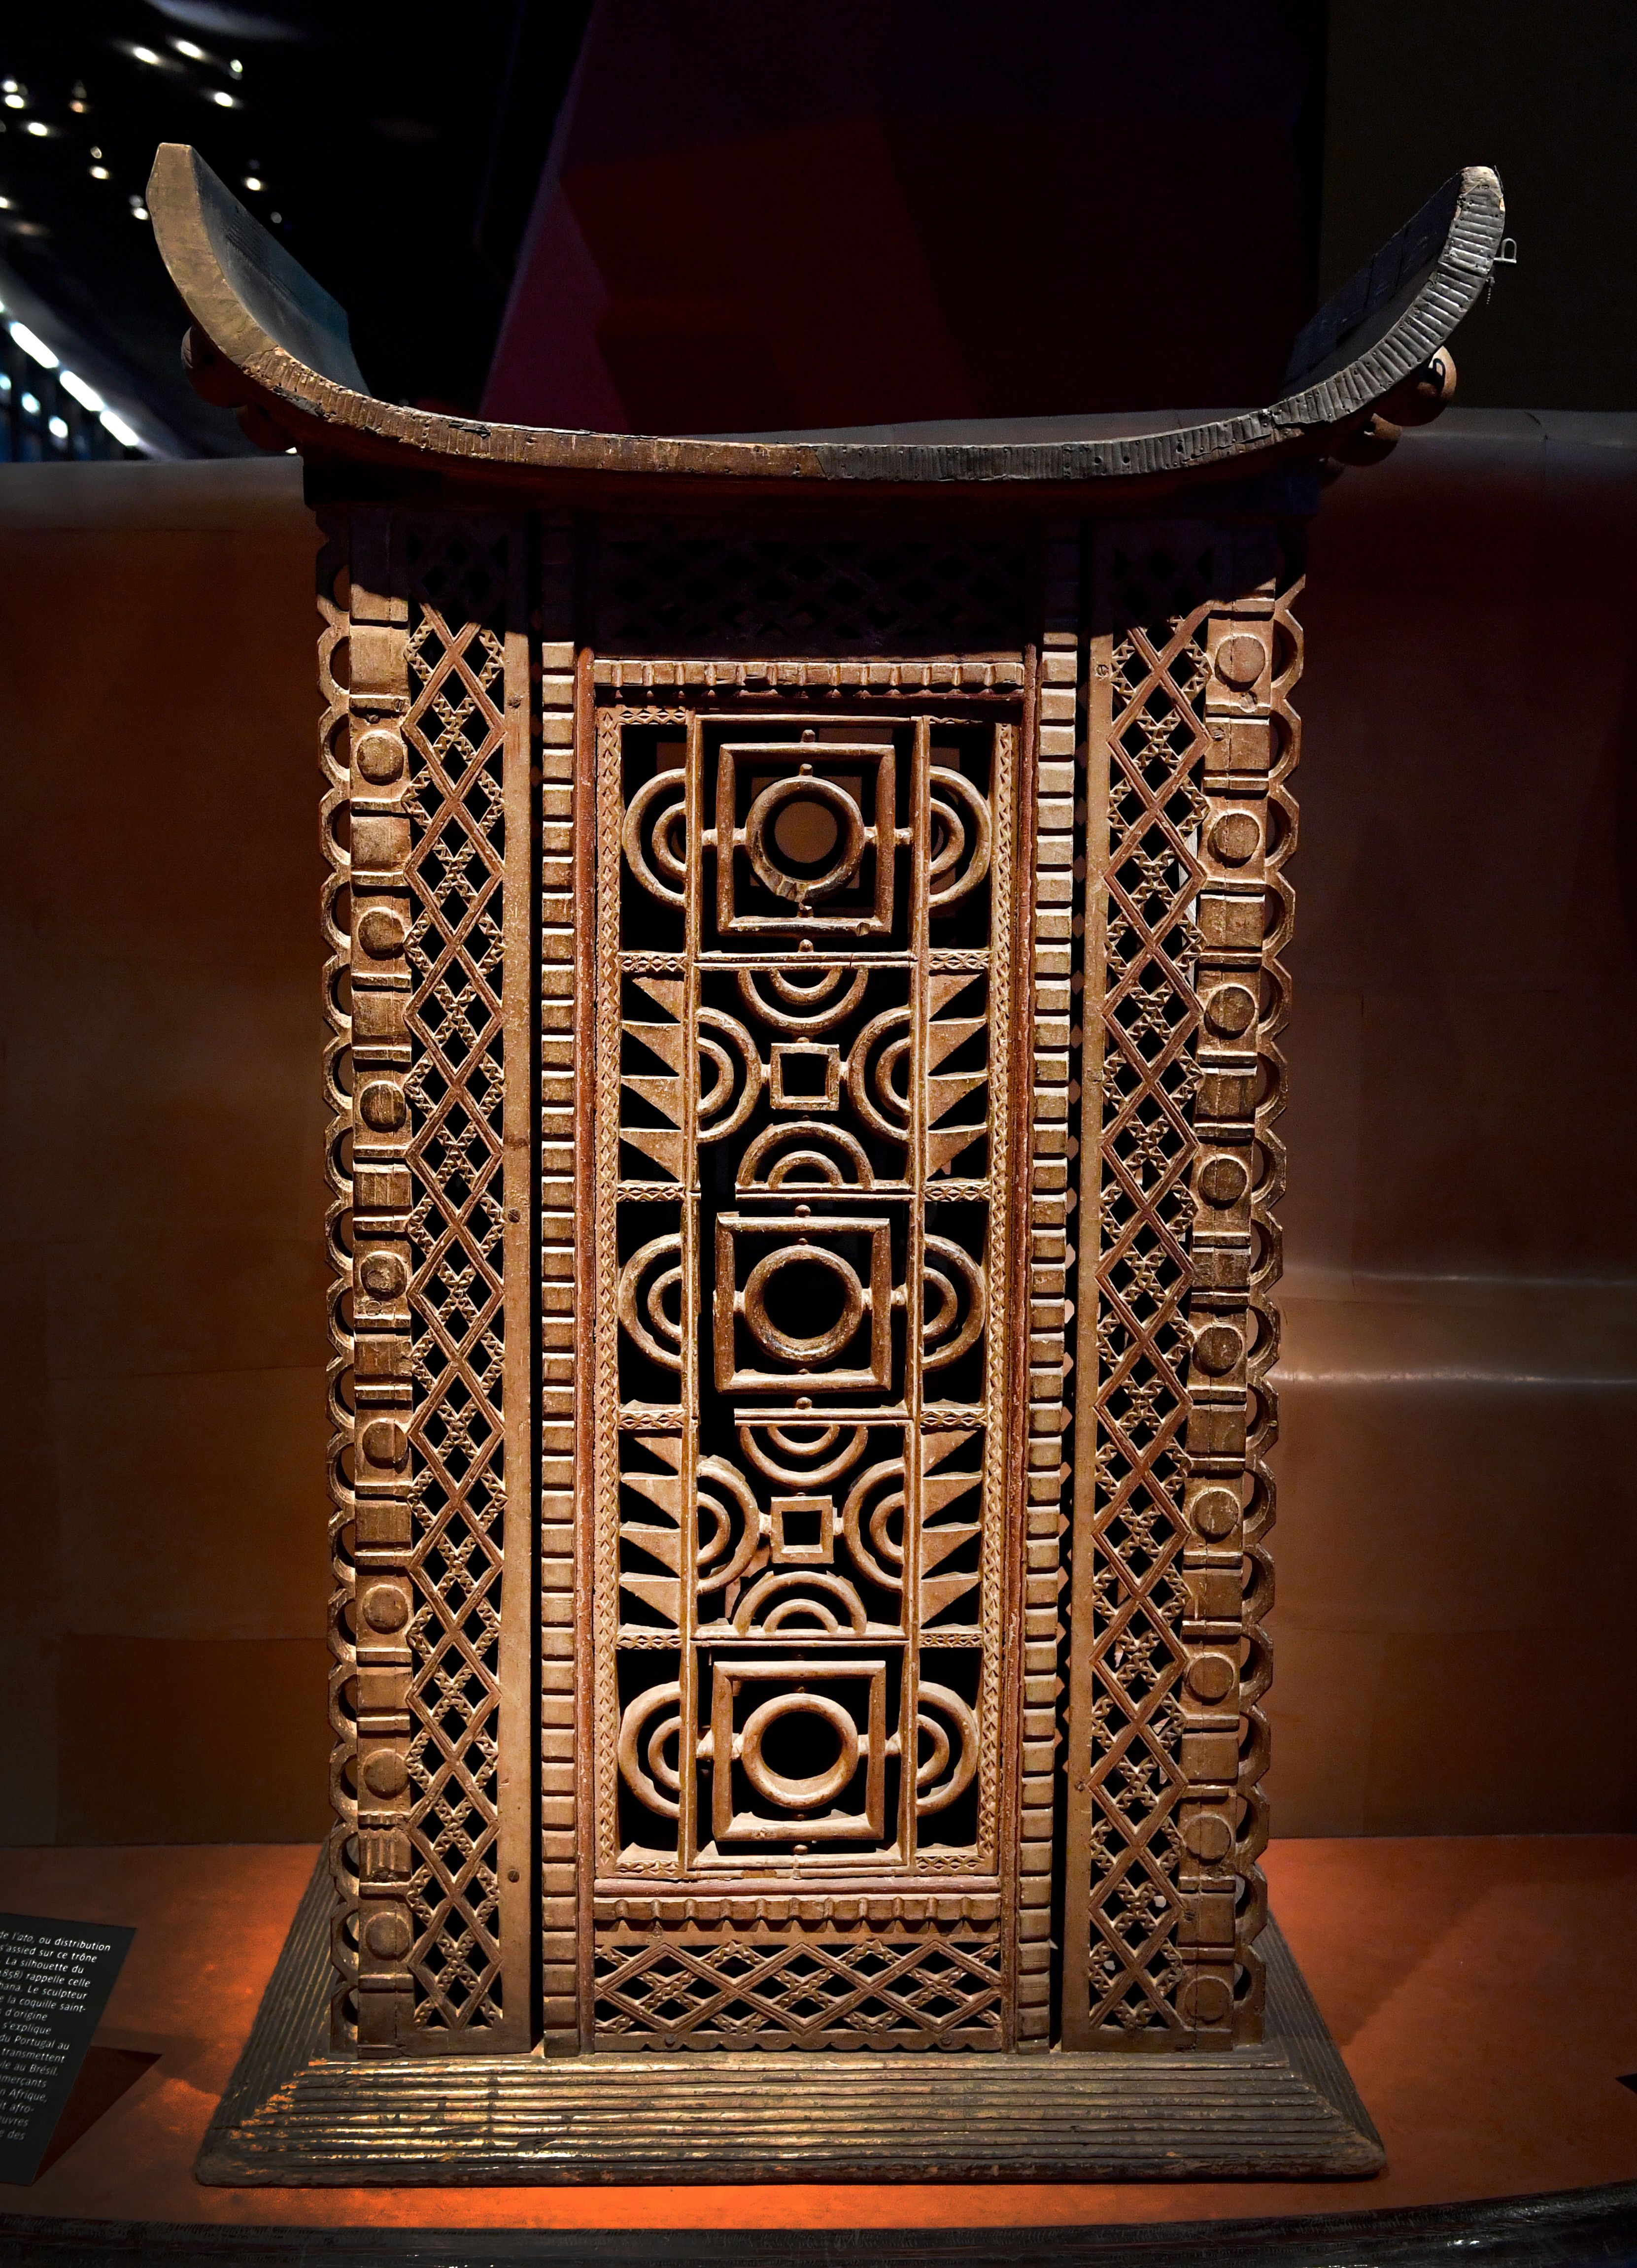 King Ghezo’s throne of Abomey in Benin, which dates back to the early 19th century. It’s currently in the Quai Branly Museum-Jacques Chirac in Paris. Benin is demanding restitution of its national treasures that had been taken from the former French colon